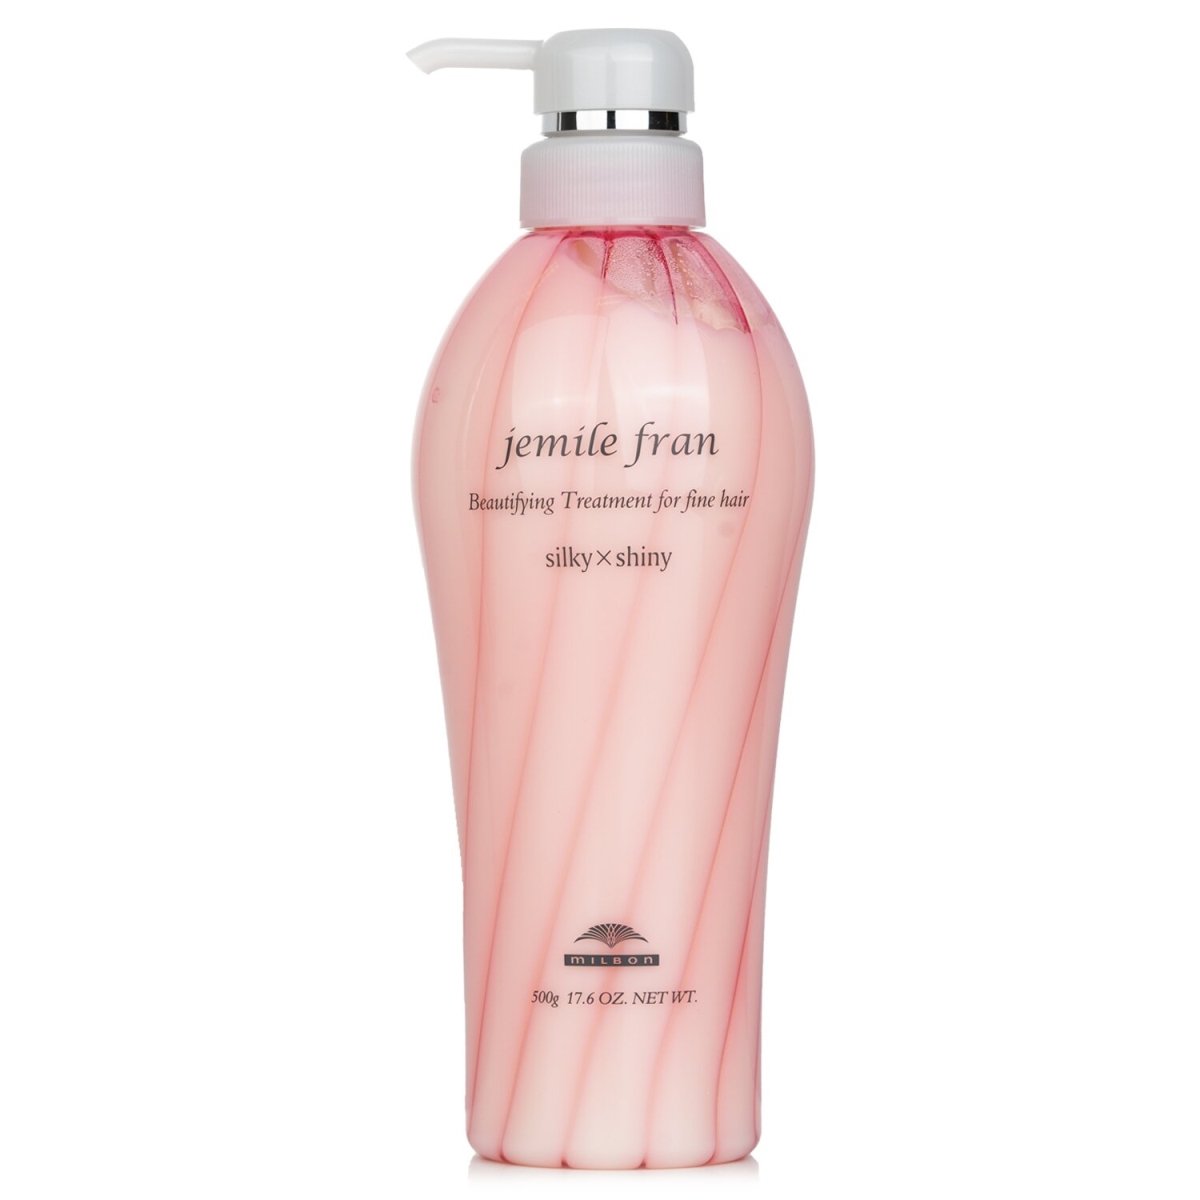 Picture of Milbon 307486 17.6 oz Jemile Fran Beautifying Treatment for Fine Hair - Silky & Shiny